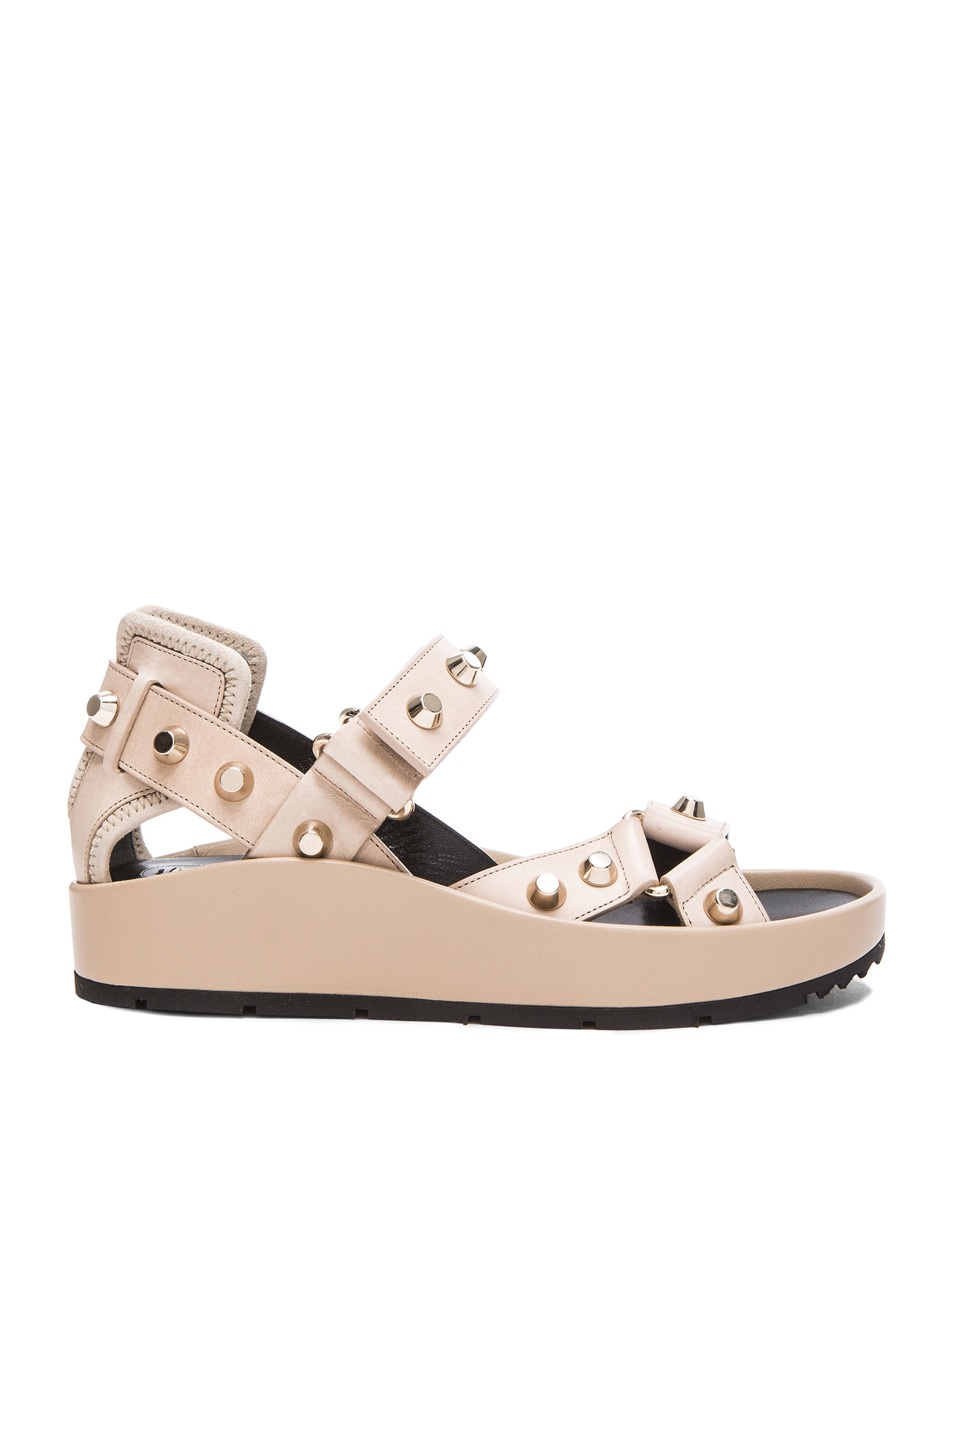 Balenciaga Studded Leather Ankle Strap Sandals in Beige | FWRD